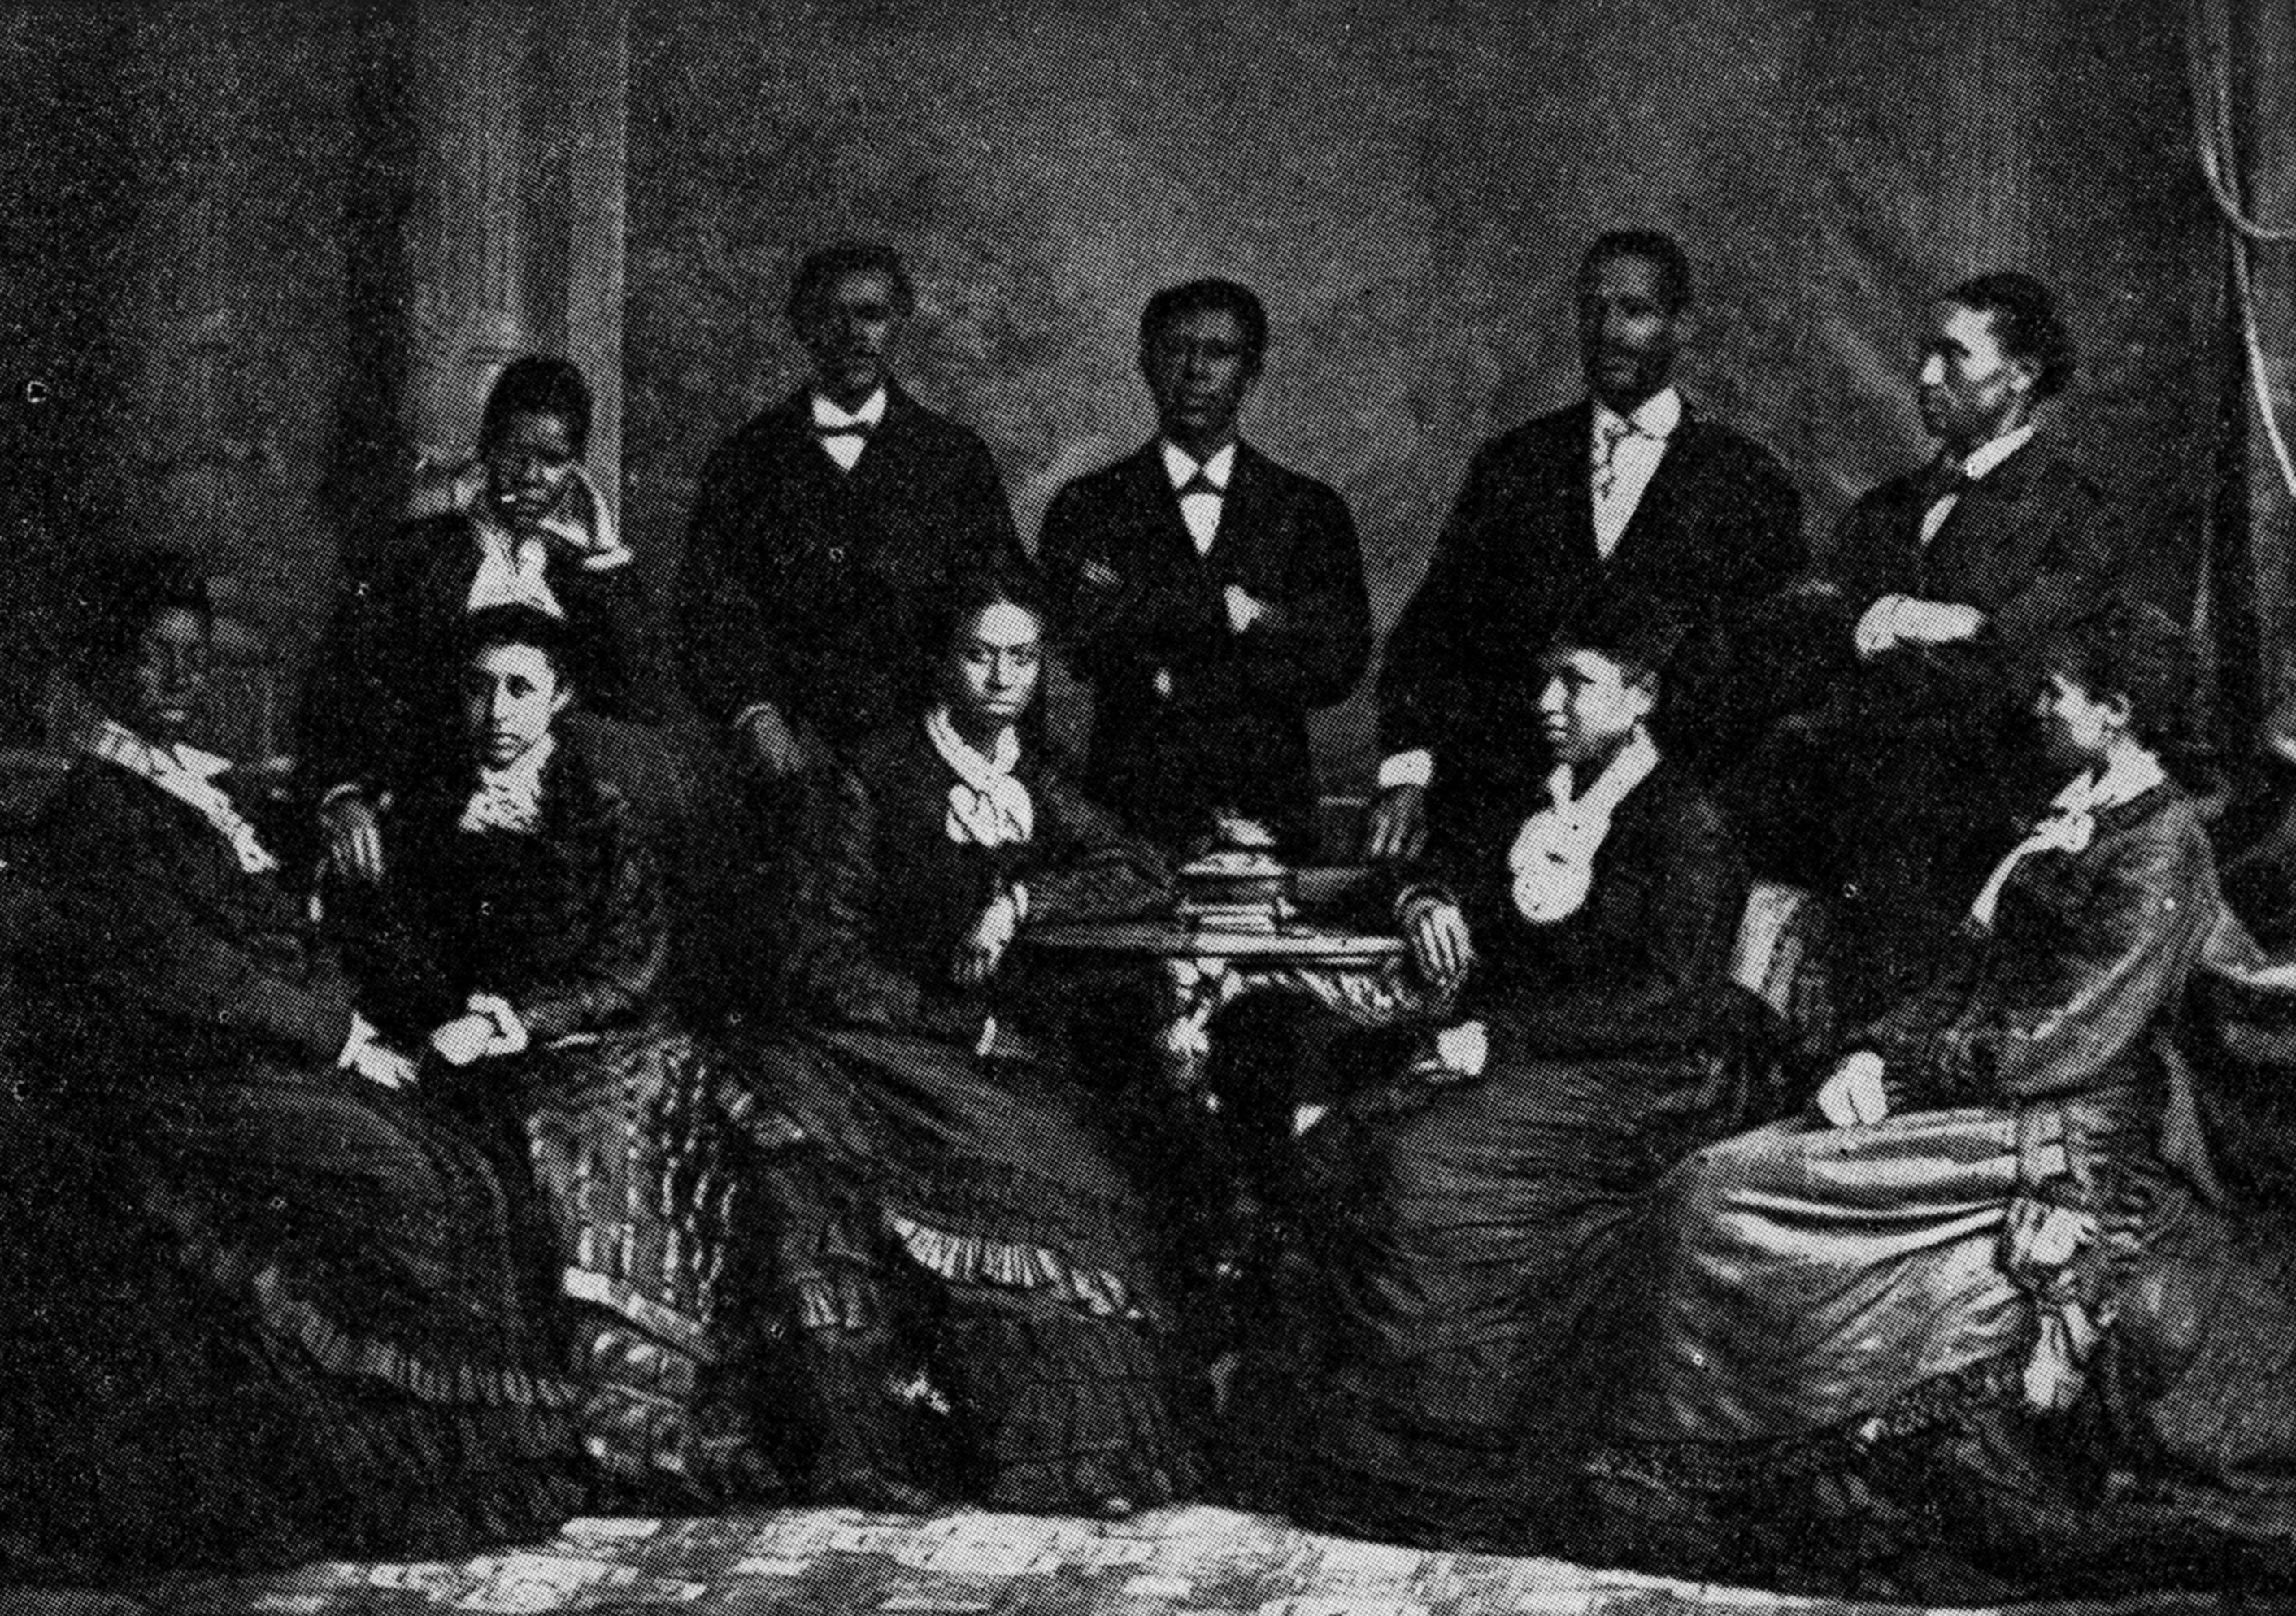 photograph of the Fisk Jubilee Singers